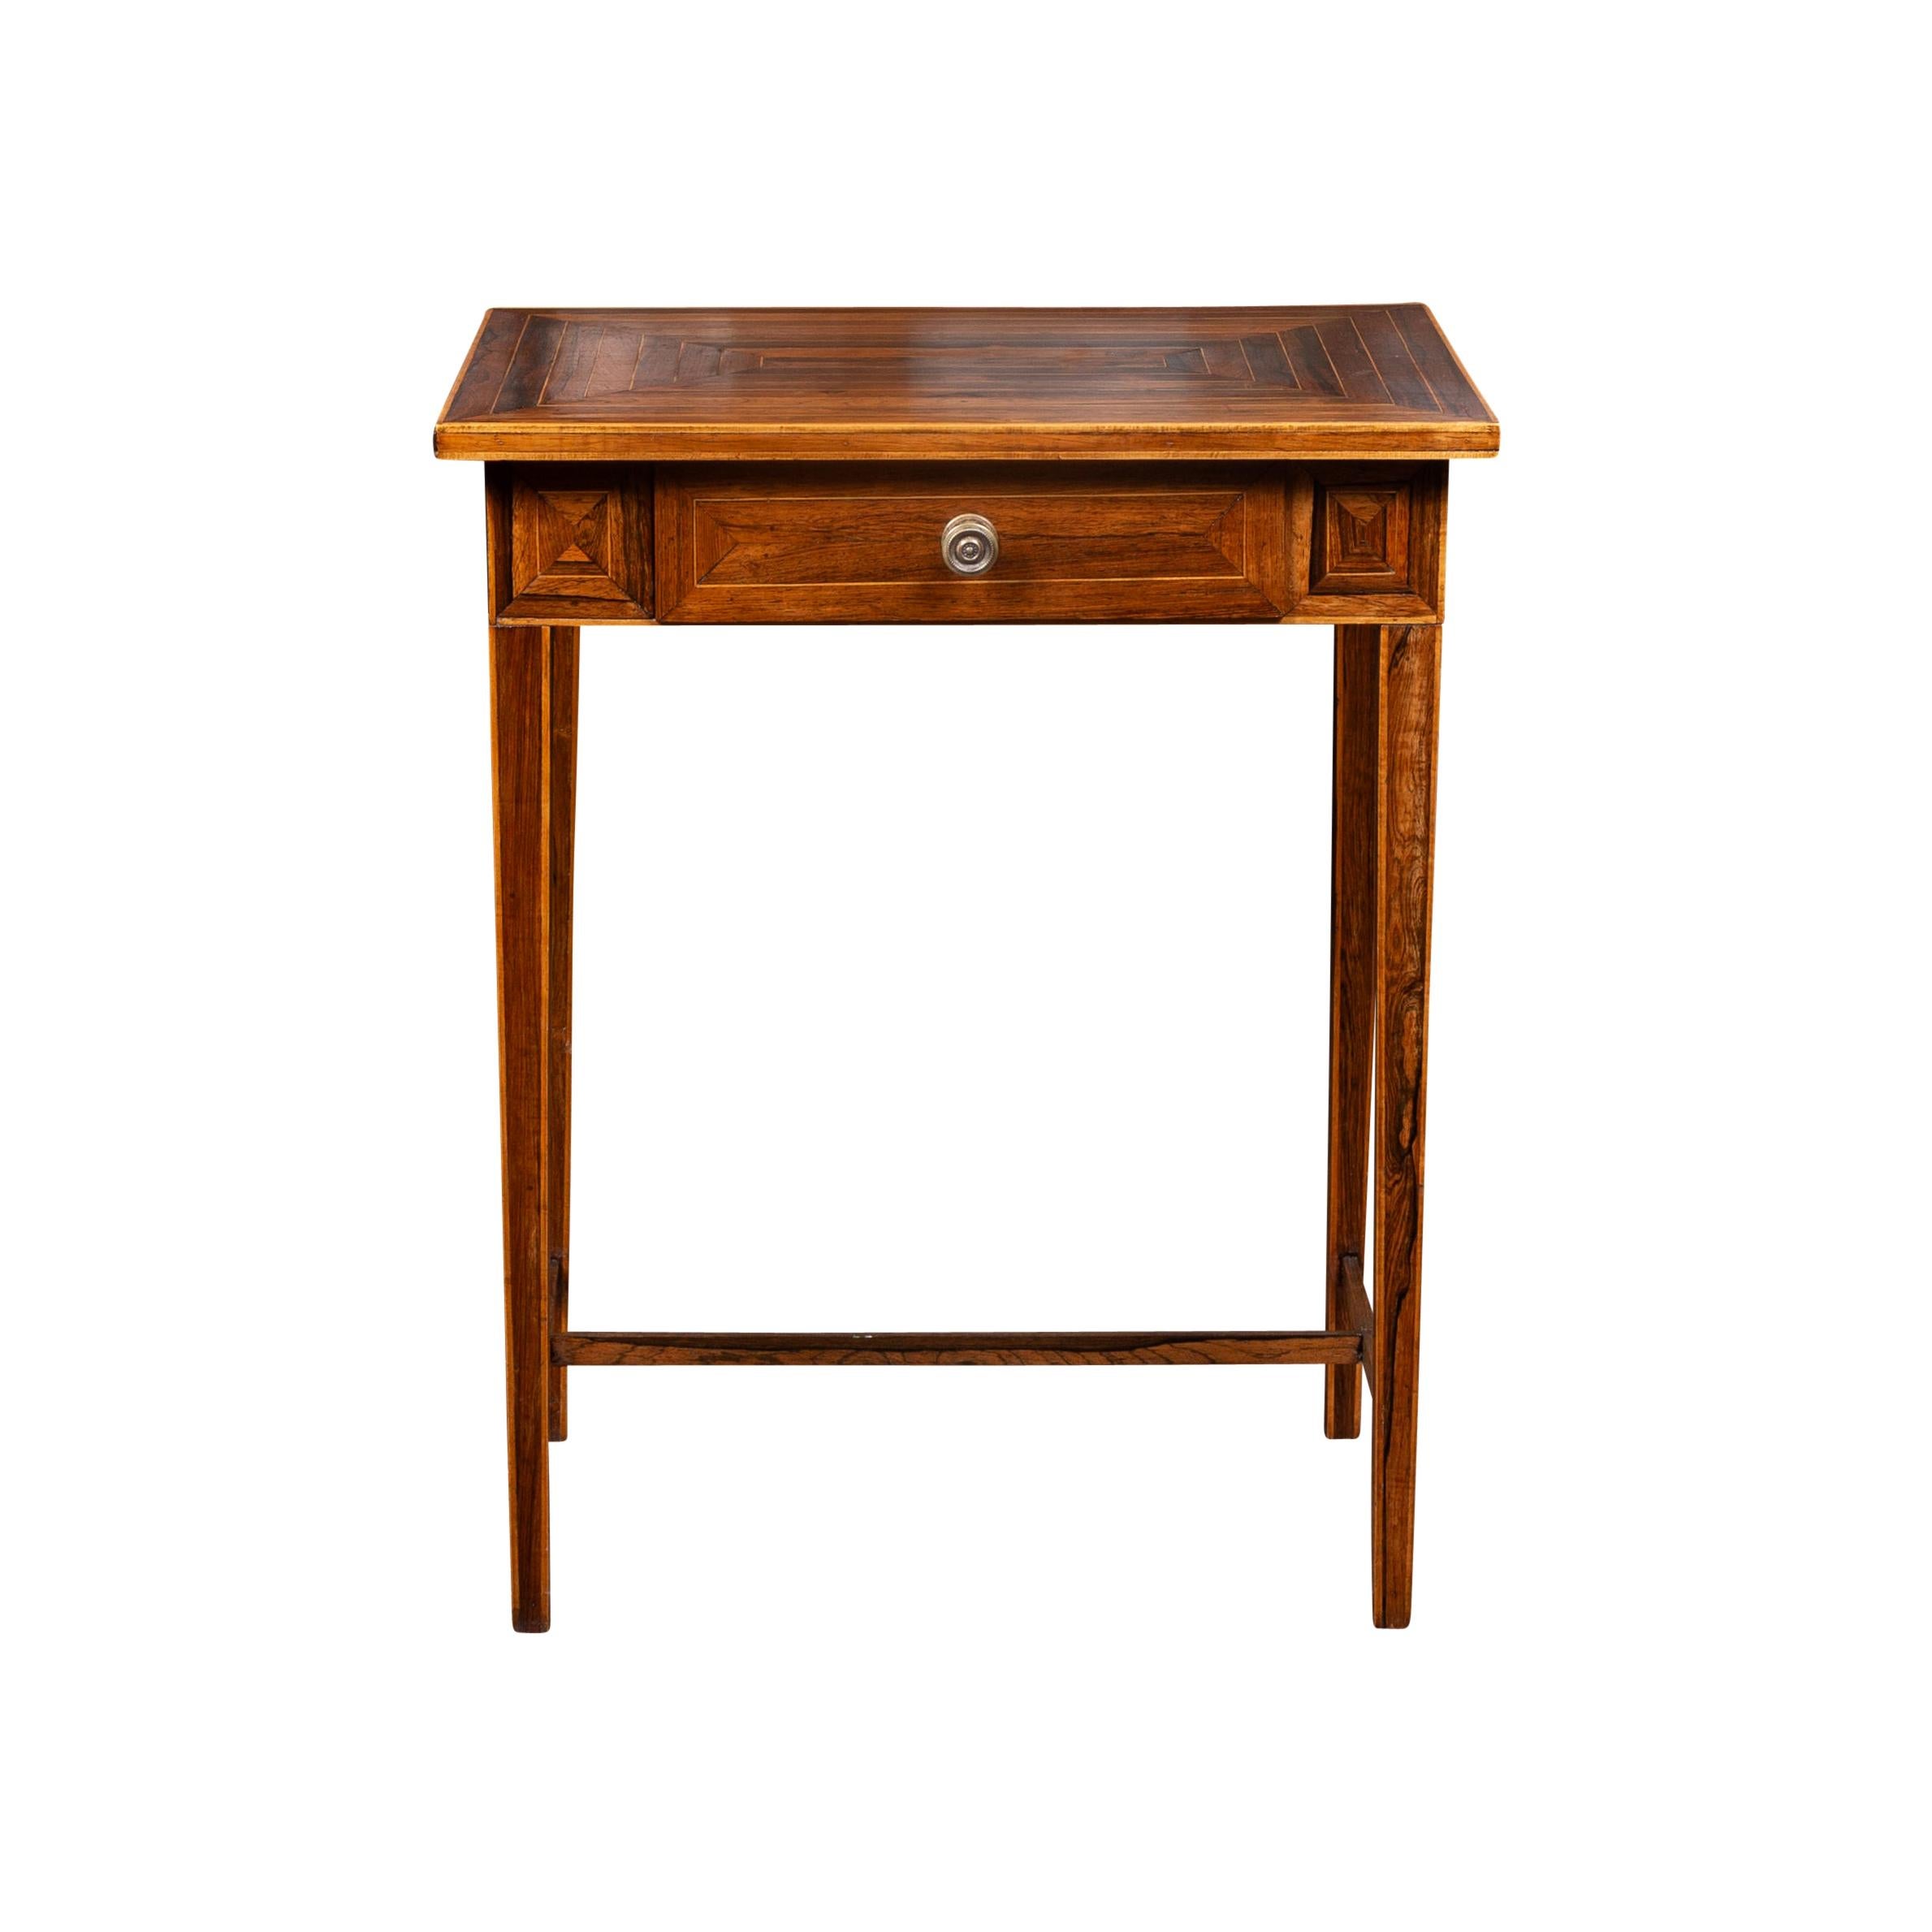 French 1850s Napoleon III Walnut Side Table with Geometric Inlay and Drawer